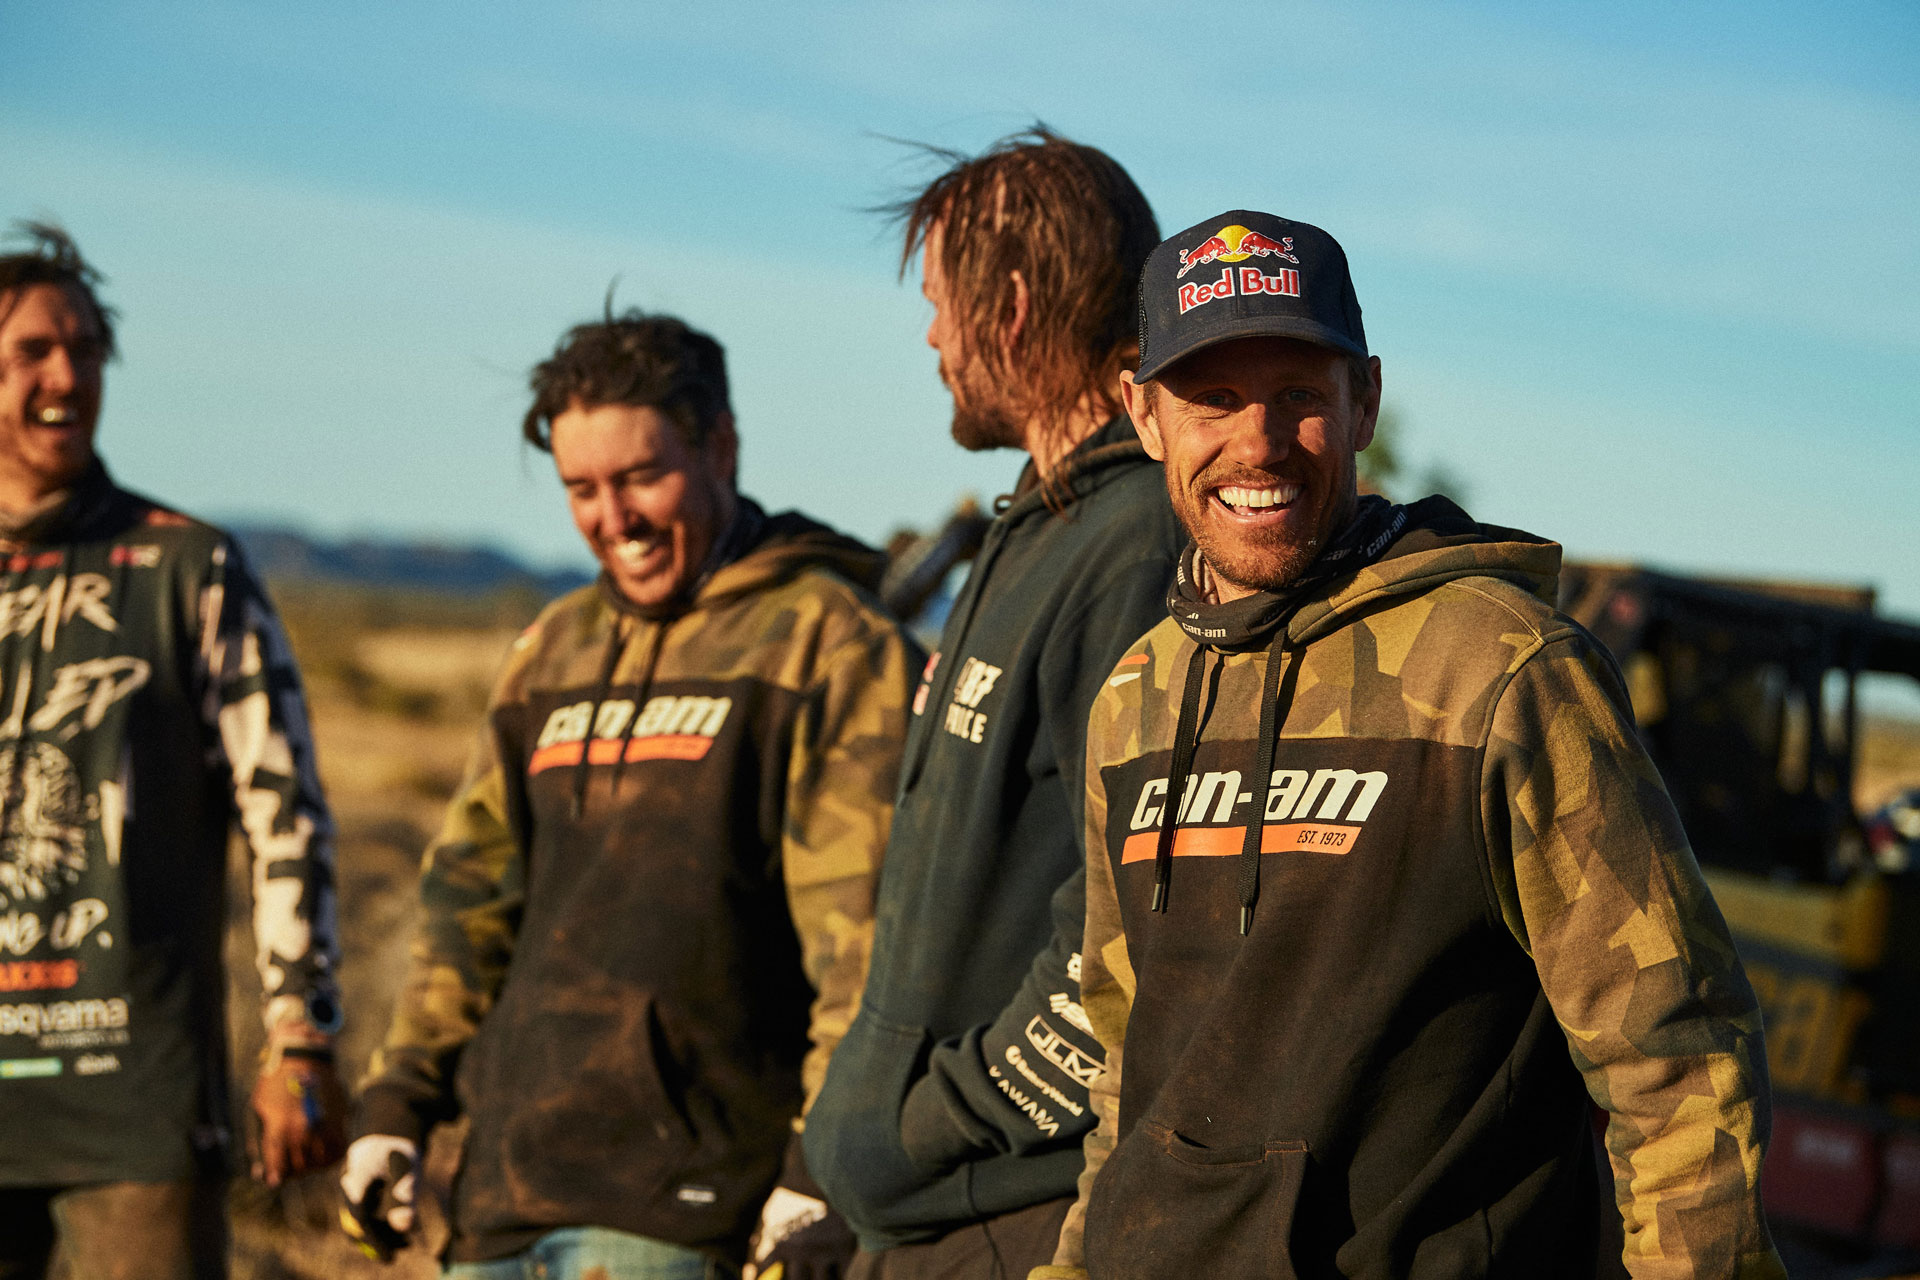 Can-Am ambassadors having a great time during an off-road event